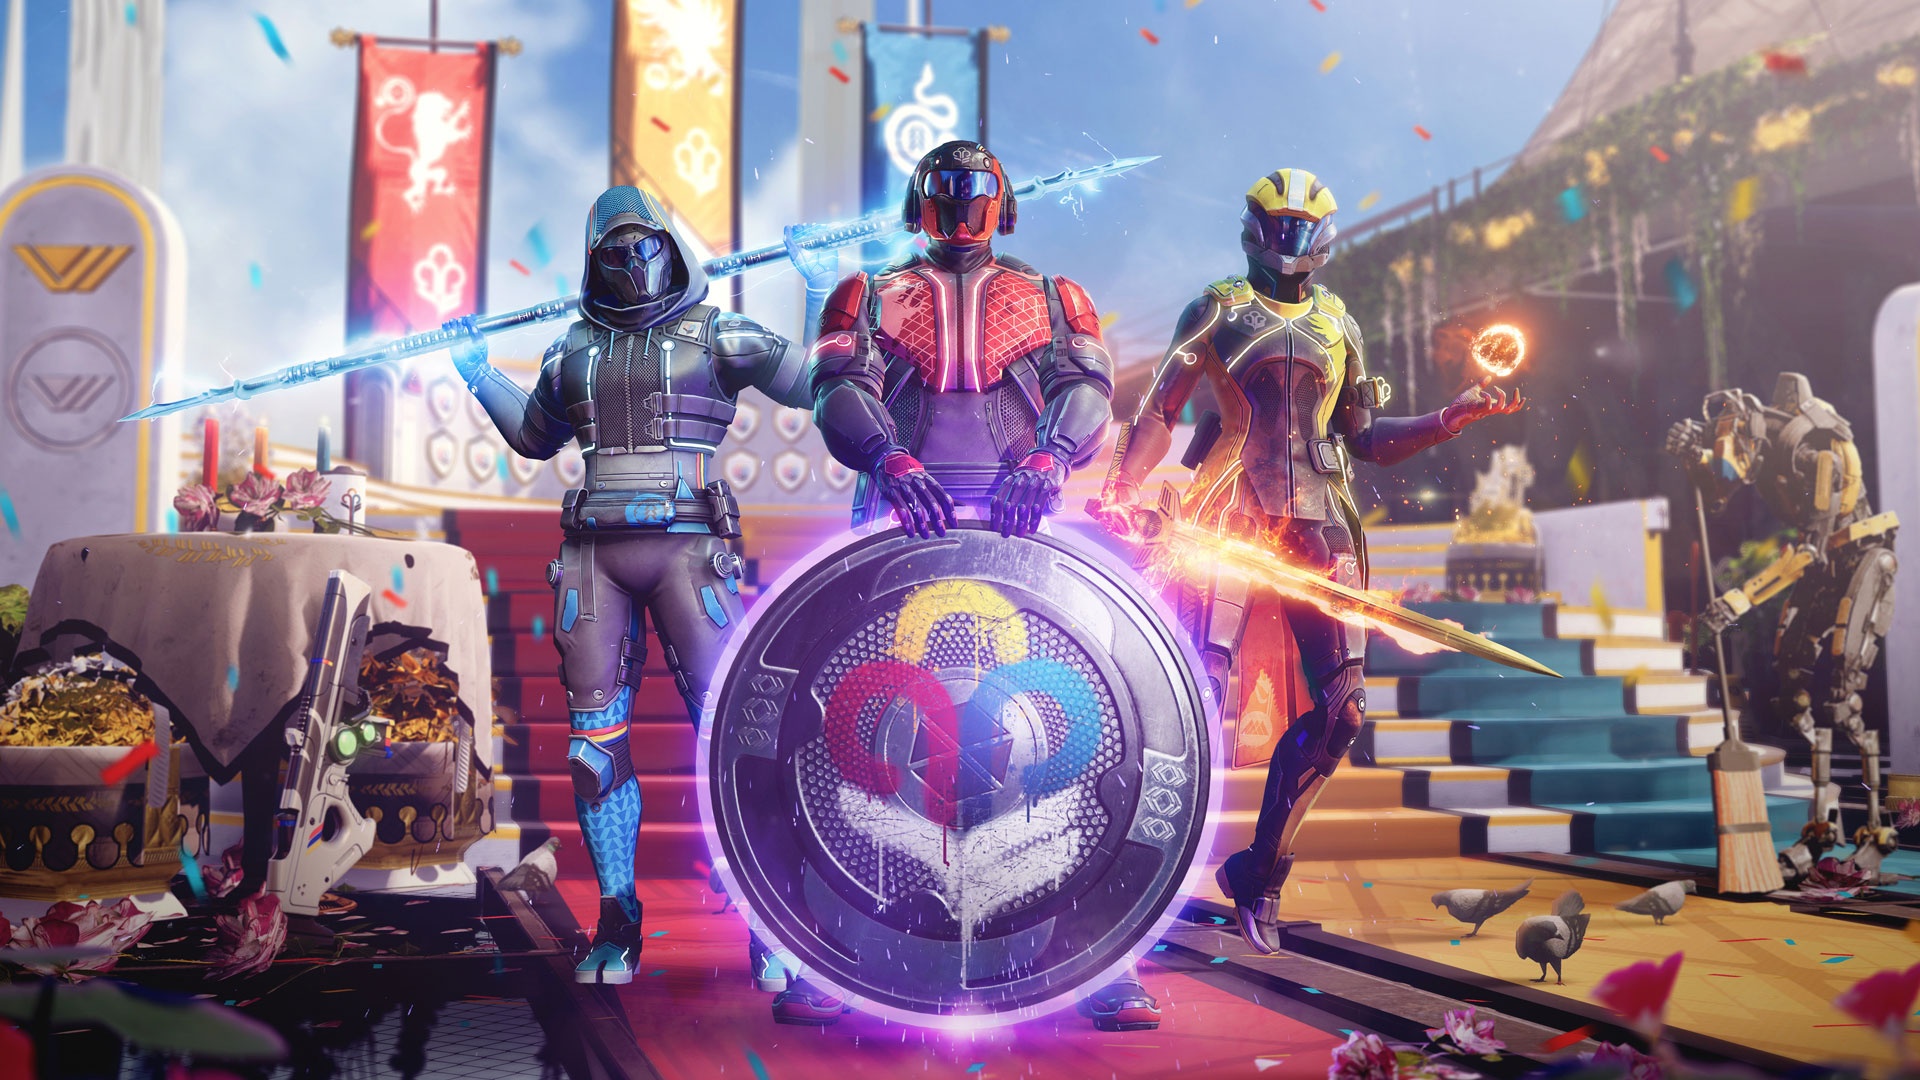 The Guardian Games event returns in Destiny 2